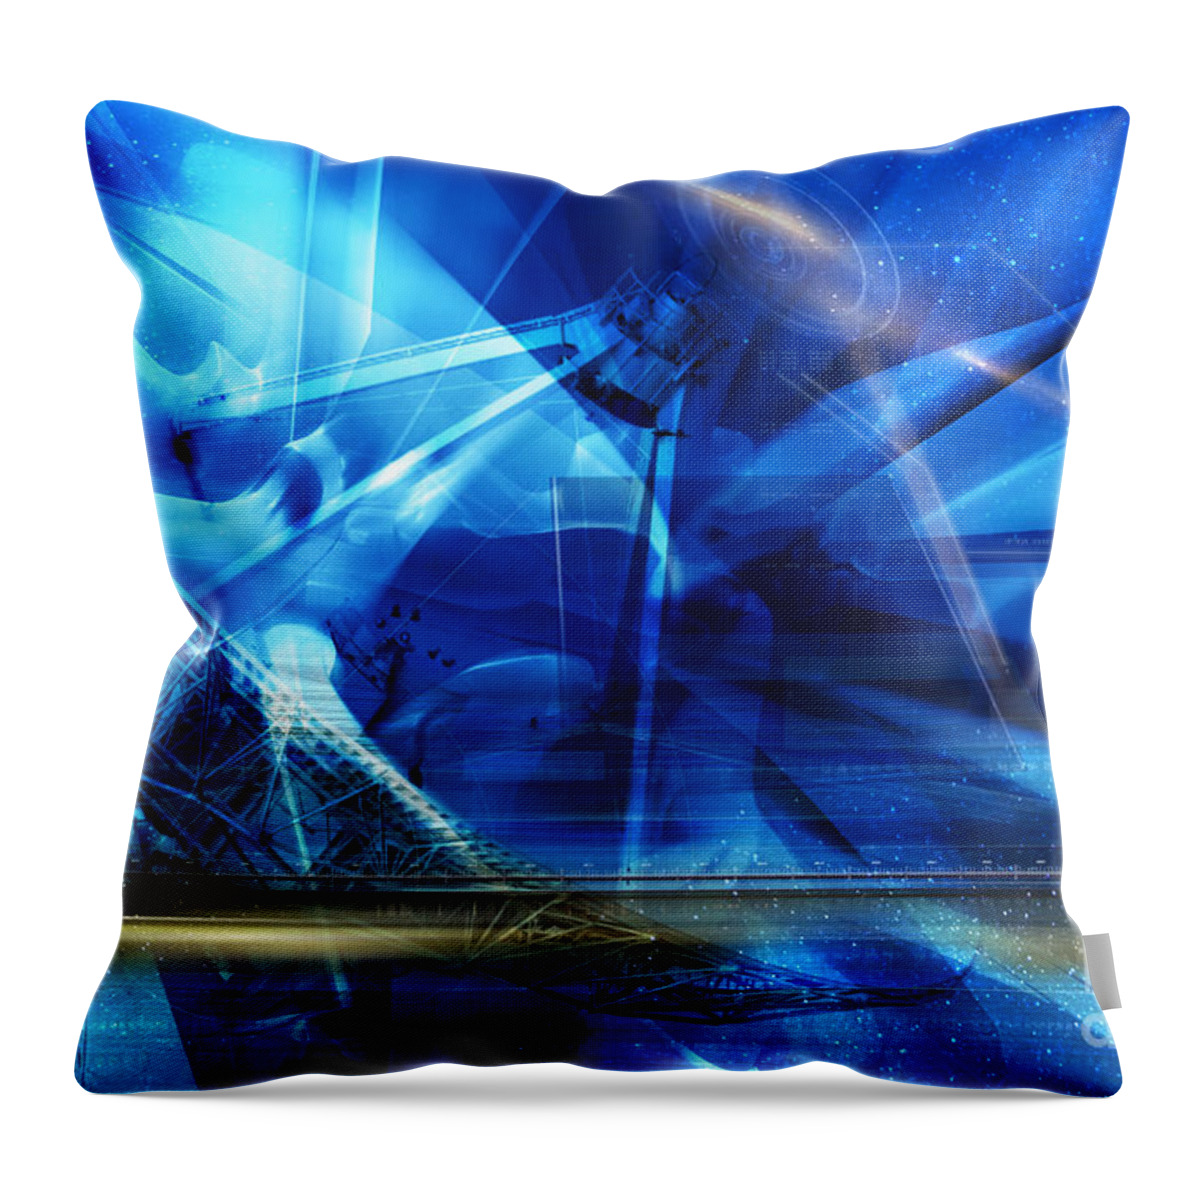 Conceptual Throw Pillow featuring the photograph Listening by Keith Kapple